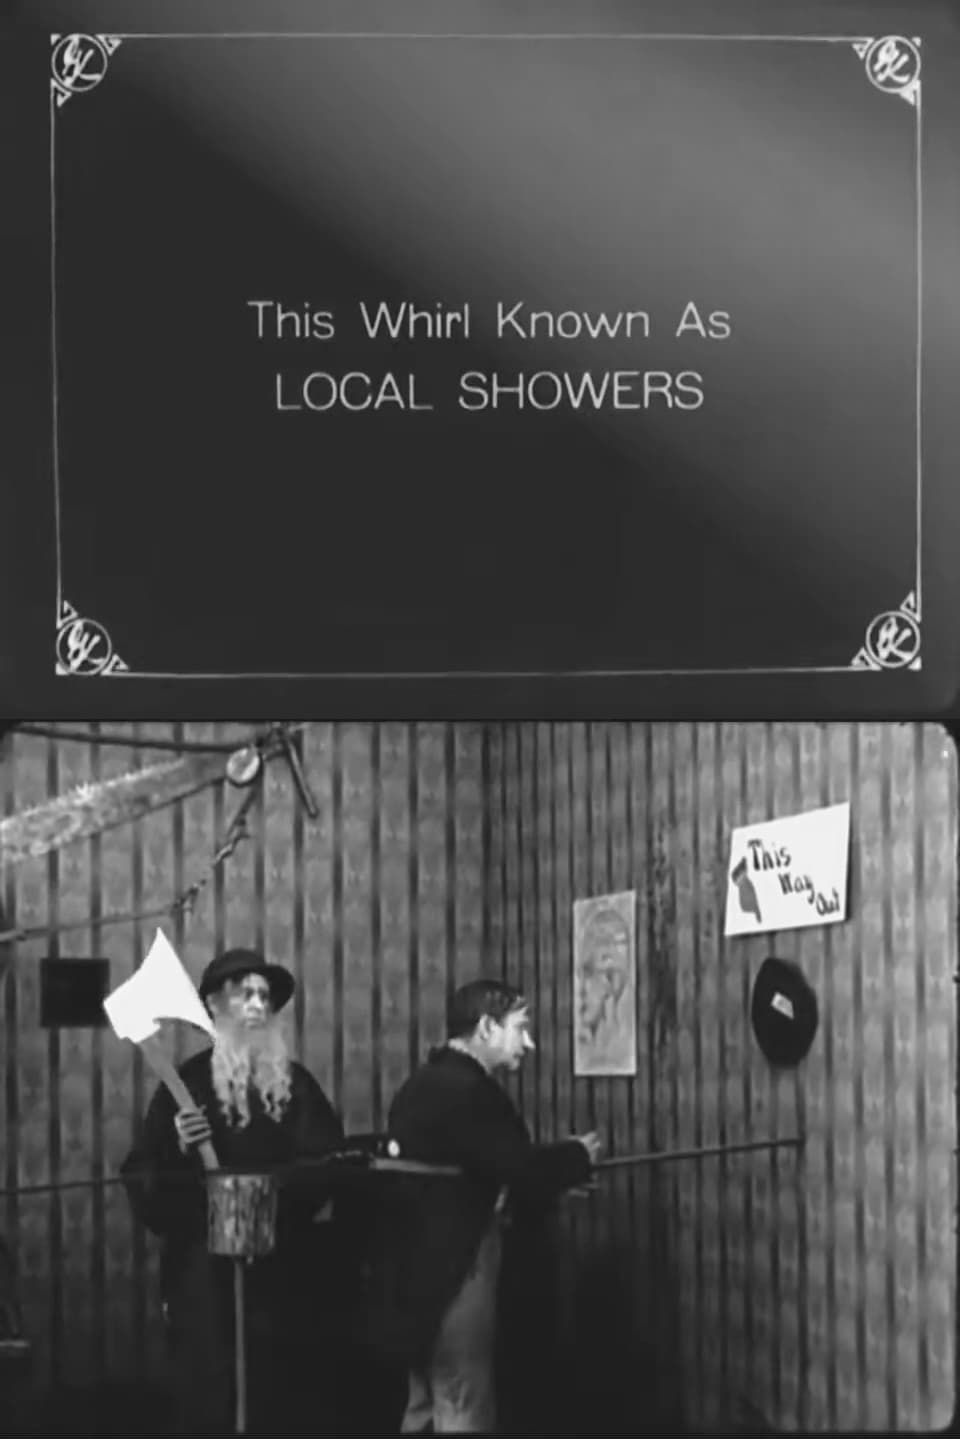 Local Showers